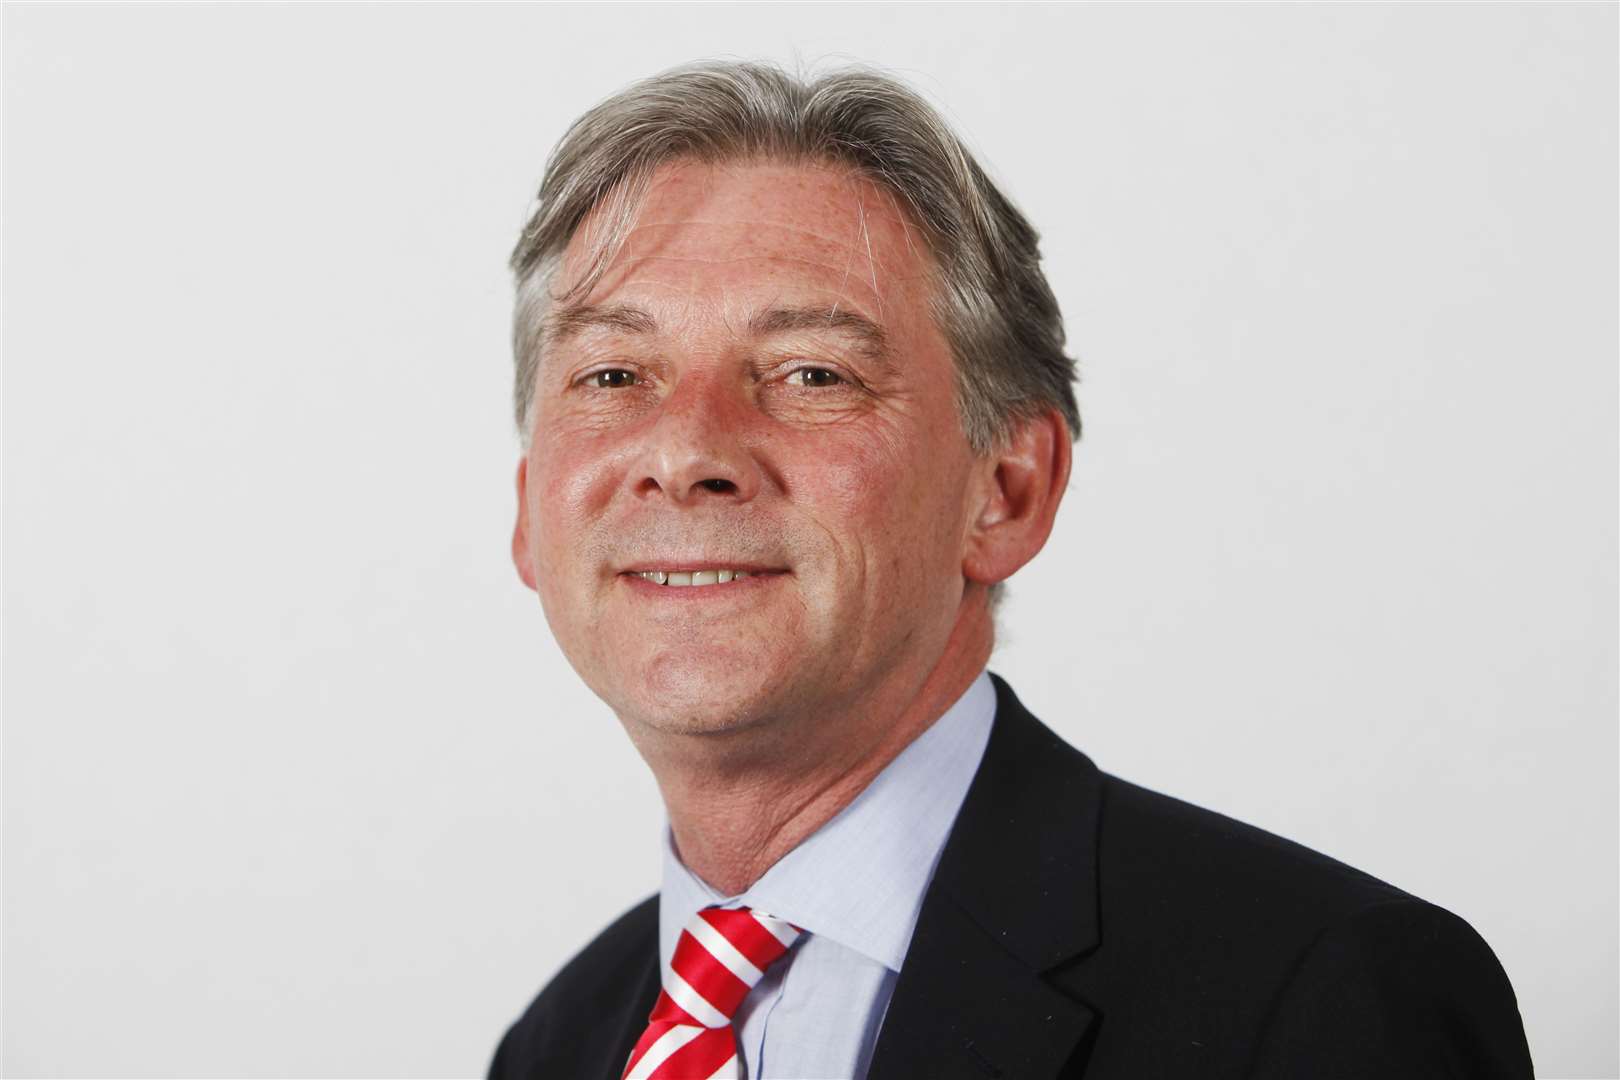 Former Scottish Labour leader Richard Leonard is the convener of the Scottish Parliament Public Affairs Committee.